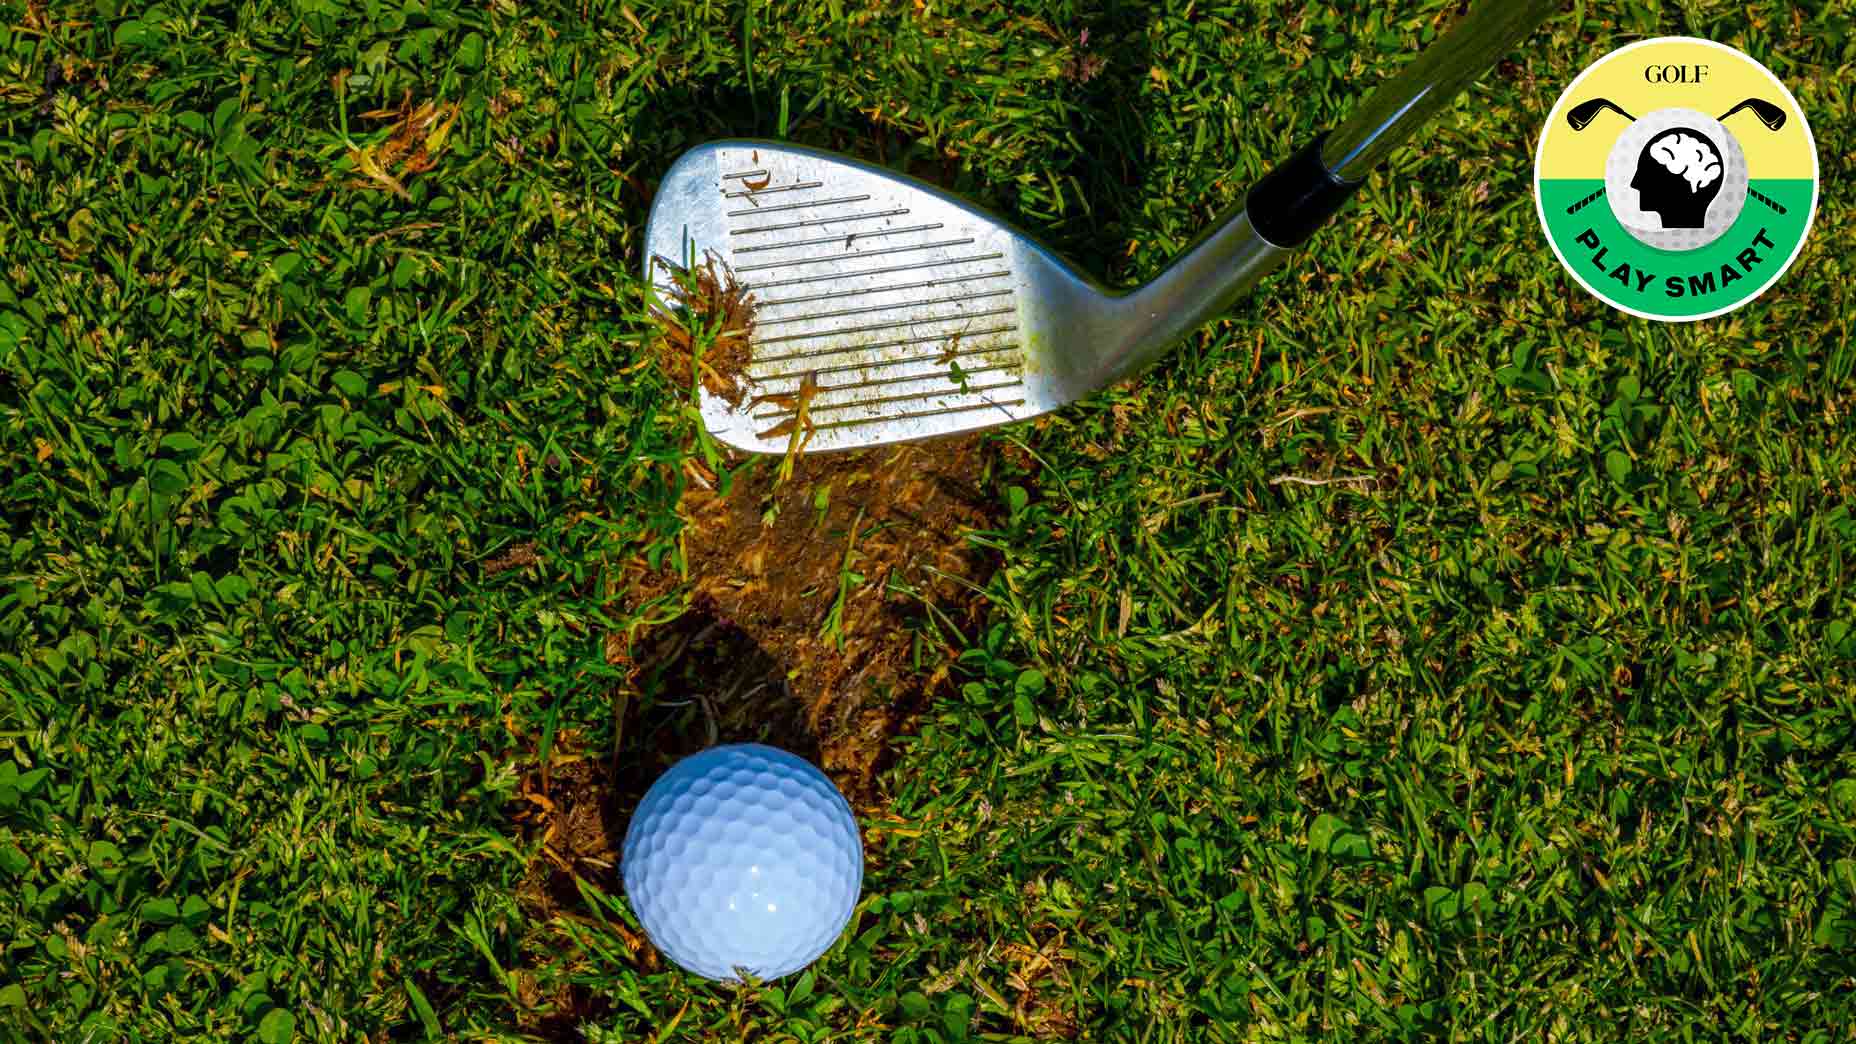 Want to learn how to stop chunking irons on the golf course? Use these tips from GOLF Top 100 Teacher Eric Alpenfels